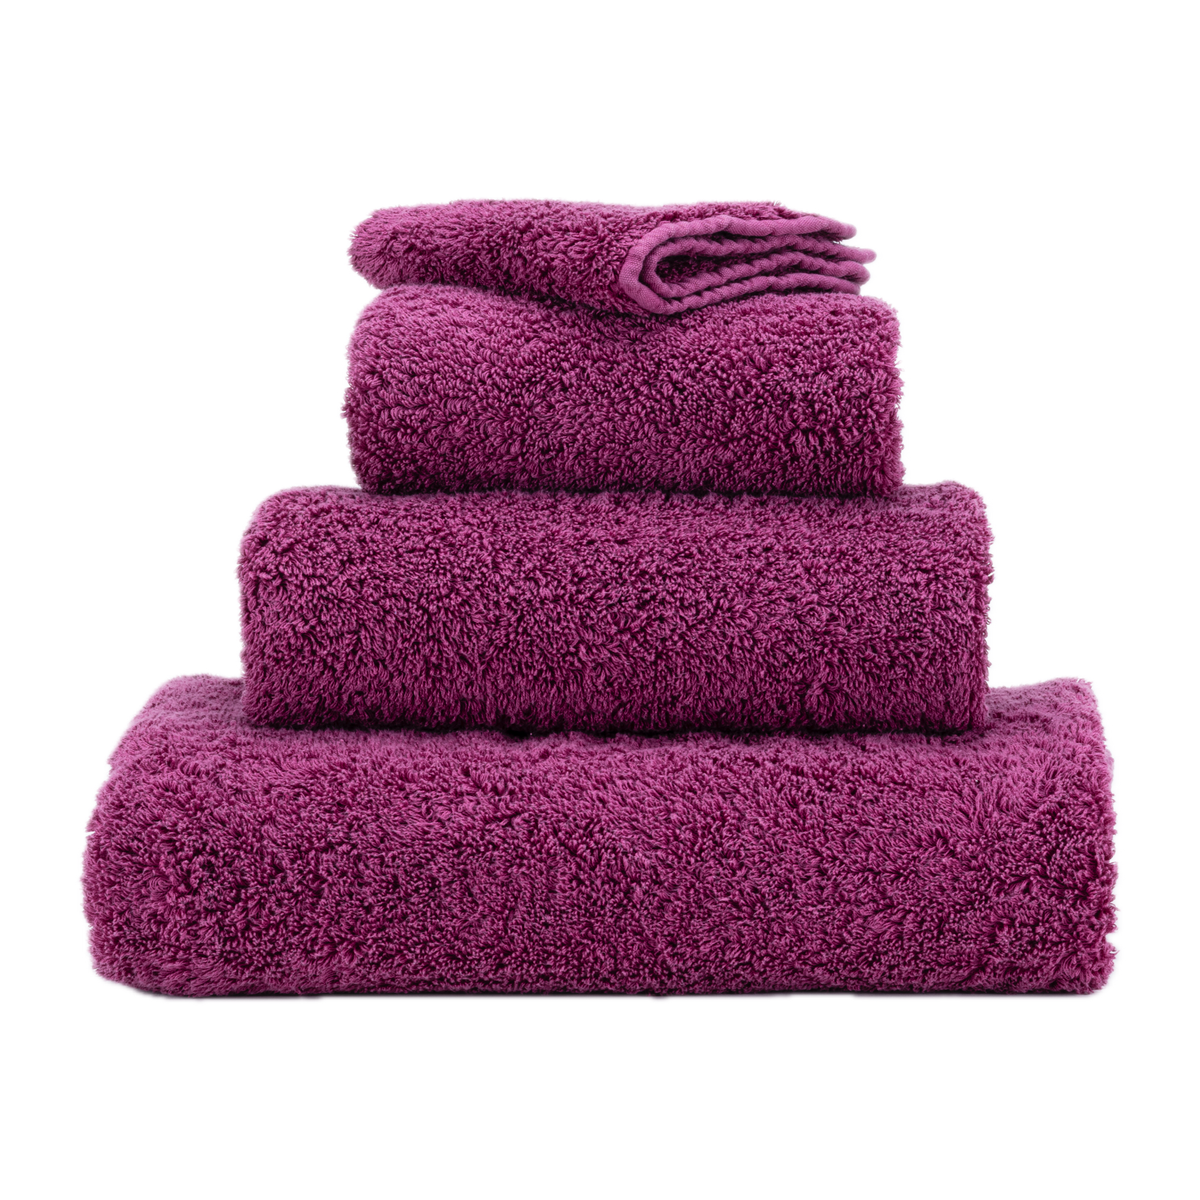 Stack of Abyss Super Pile Bath Towels in Baton Rouge Color